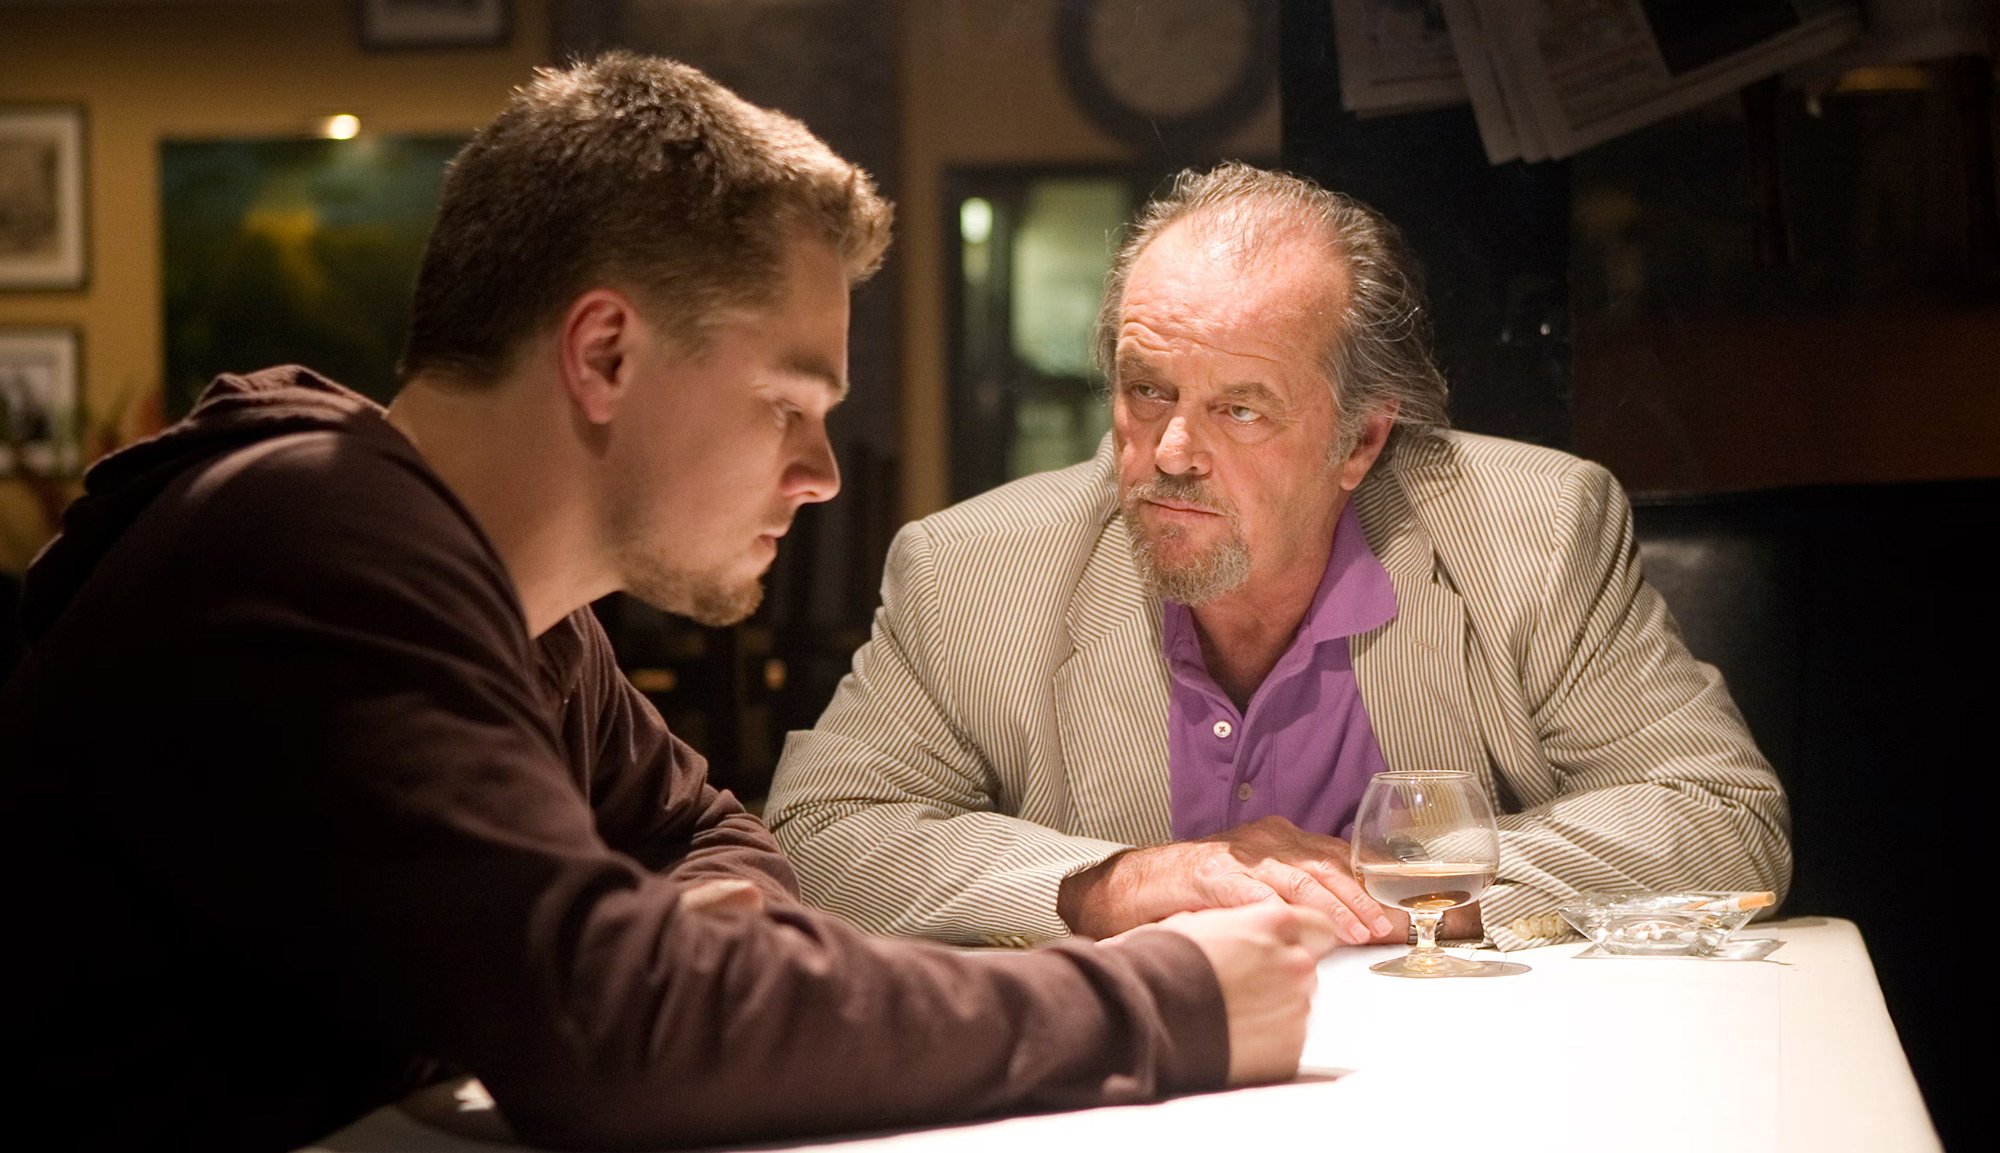 Leonardo DiCaprio and Jack Nicholson in "The Departed"